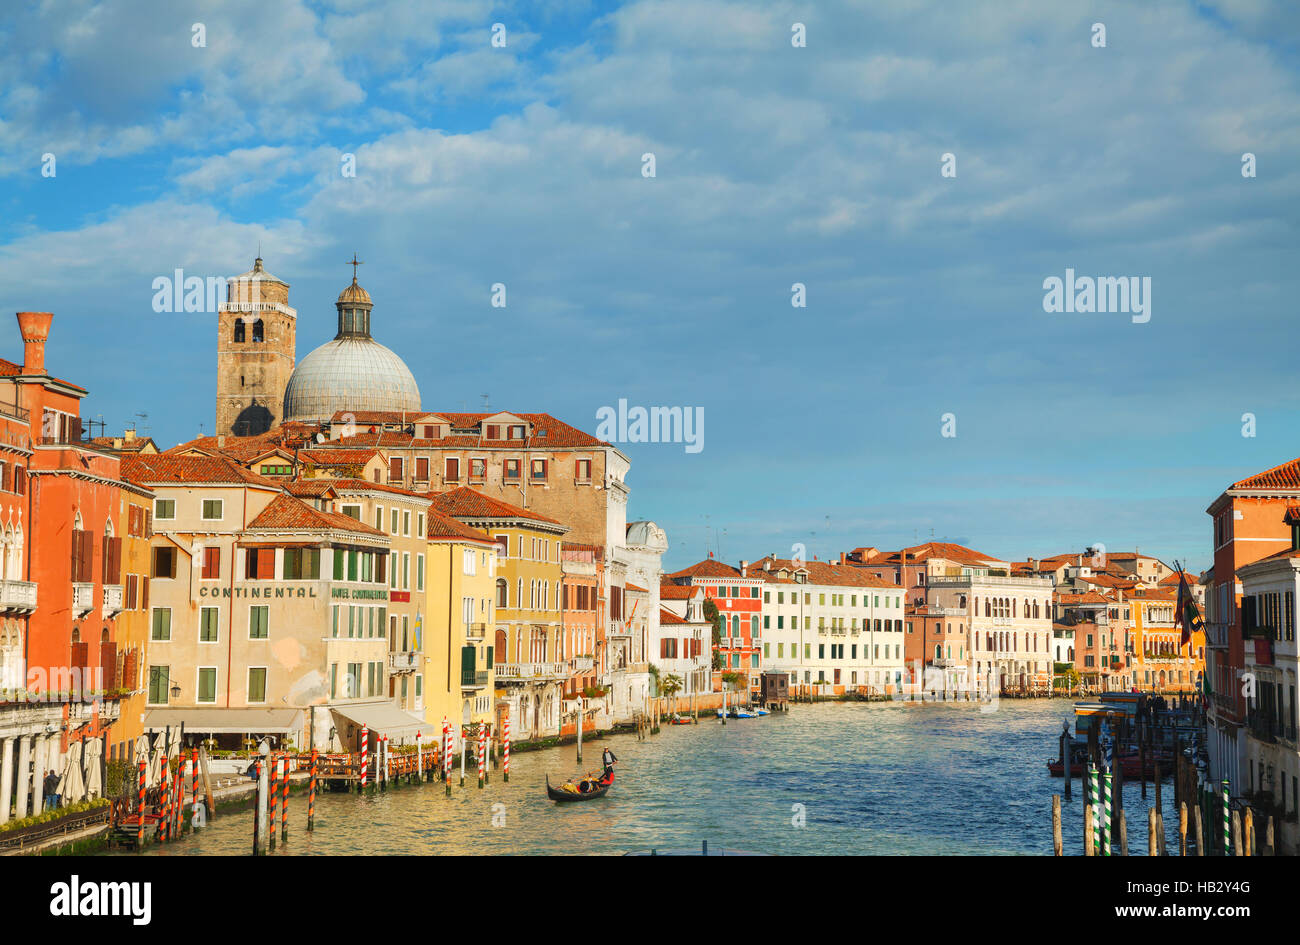 Overview of Grand Canal in Venice, Italy Stock Photo